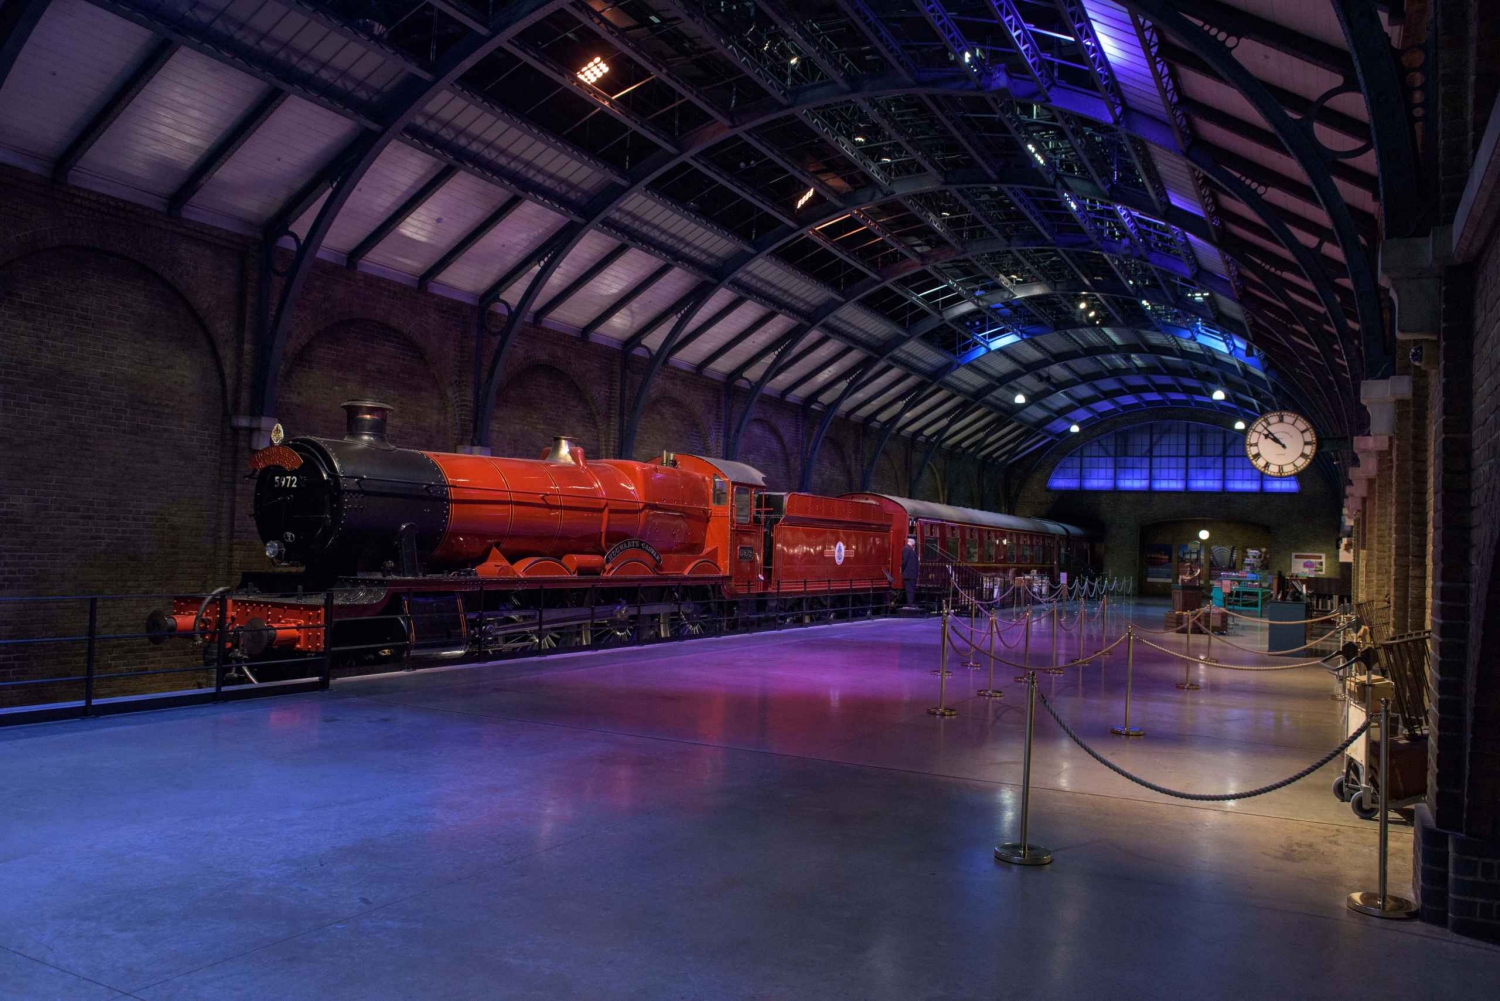 Warner Bros. Studio Tour with Train Tickets from London